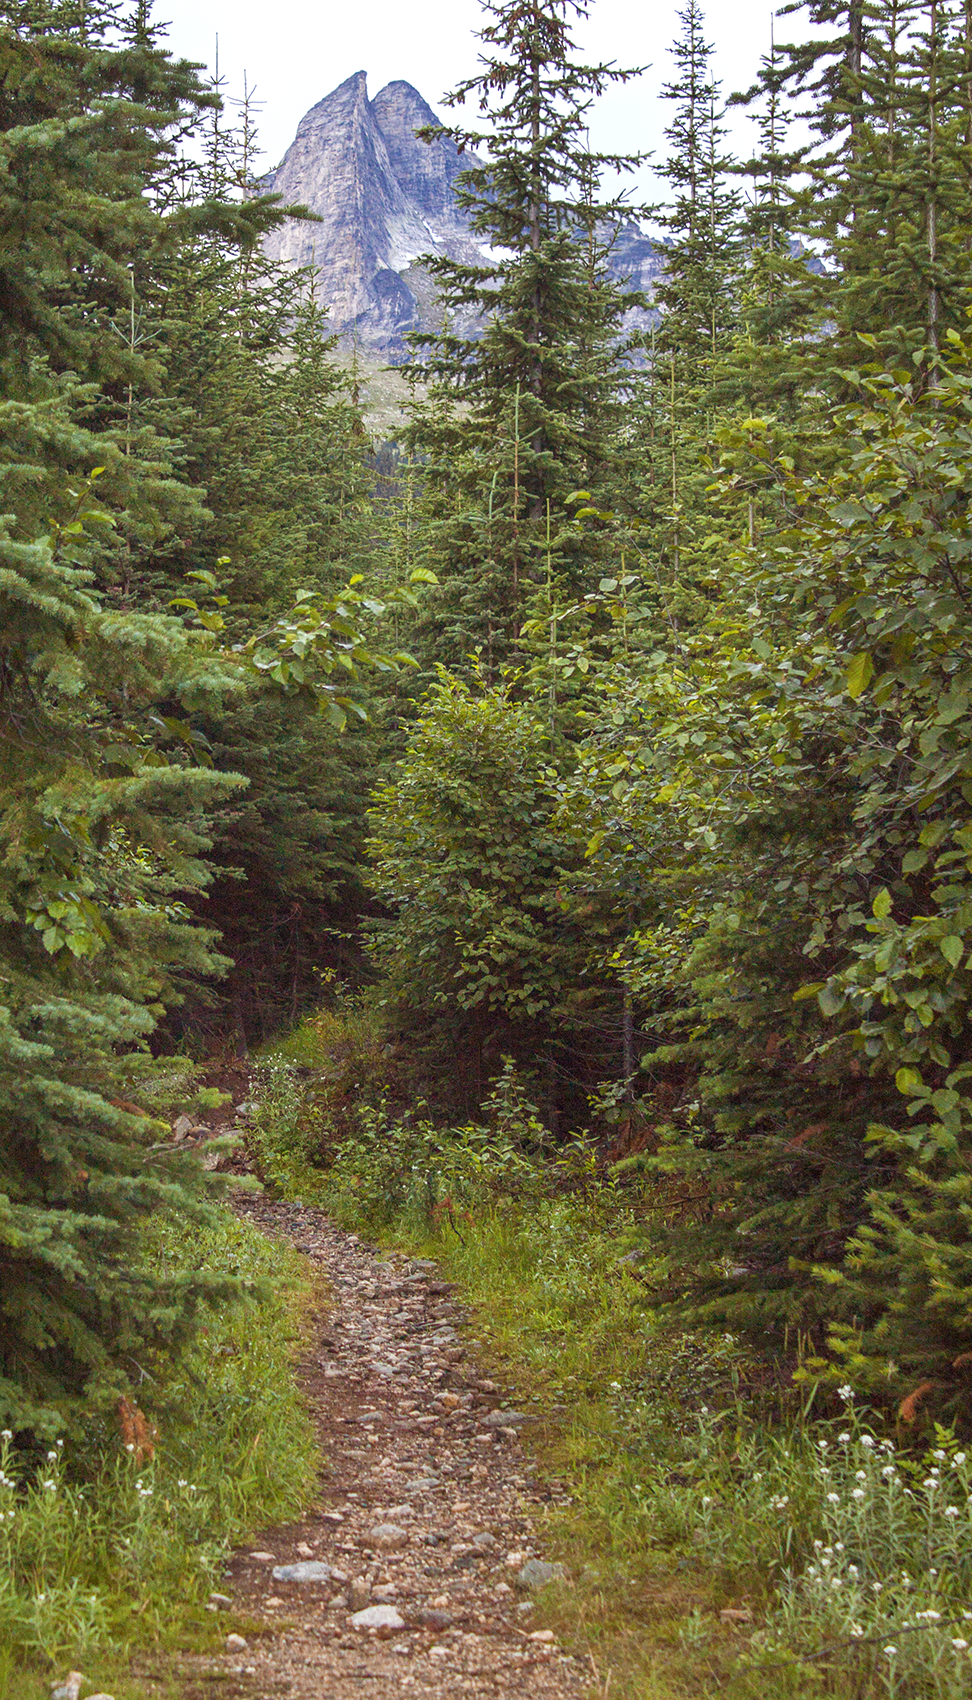 A path leads into a dense forest, towards a rocky mountain.